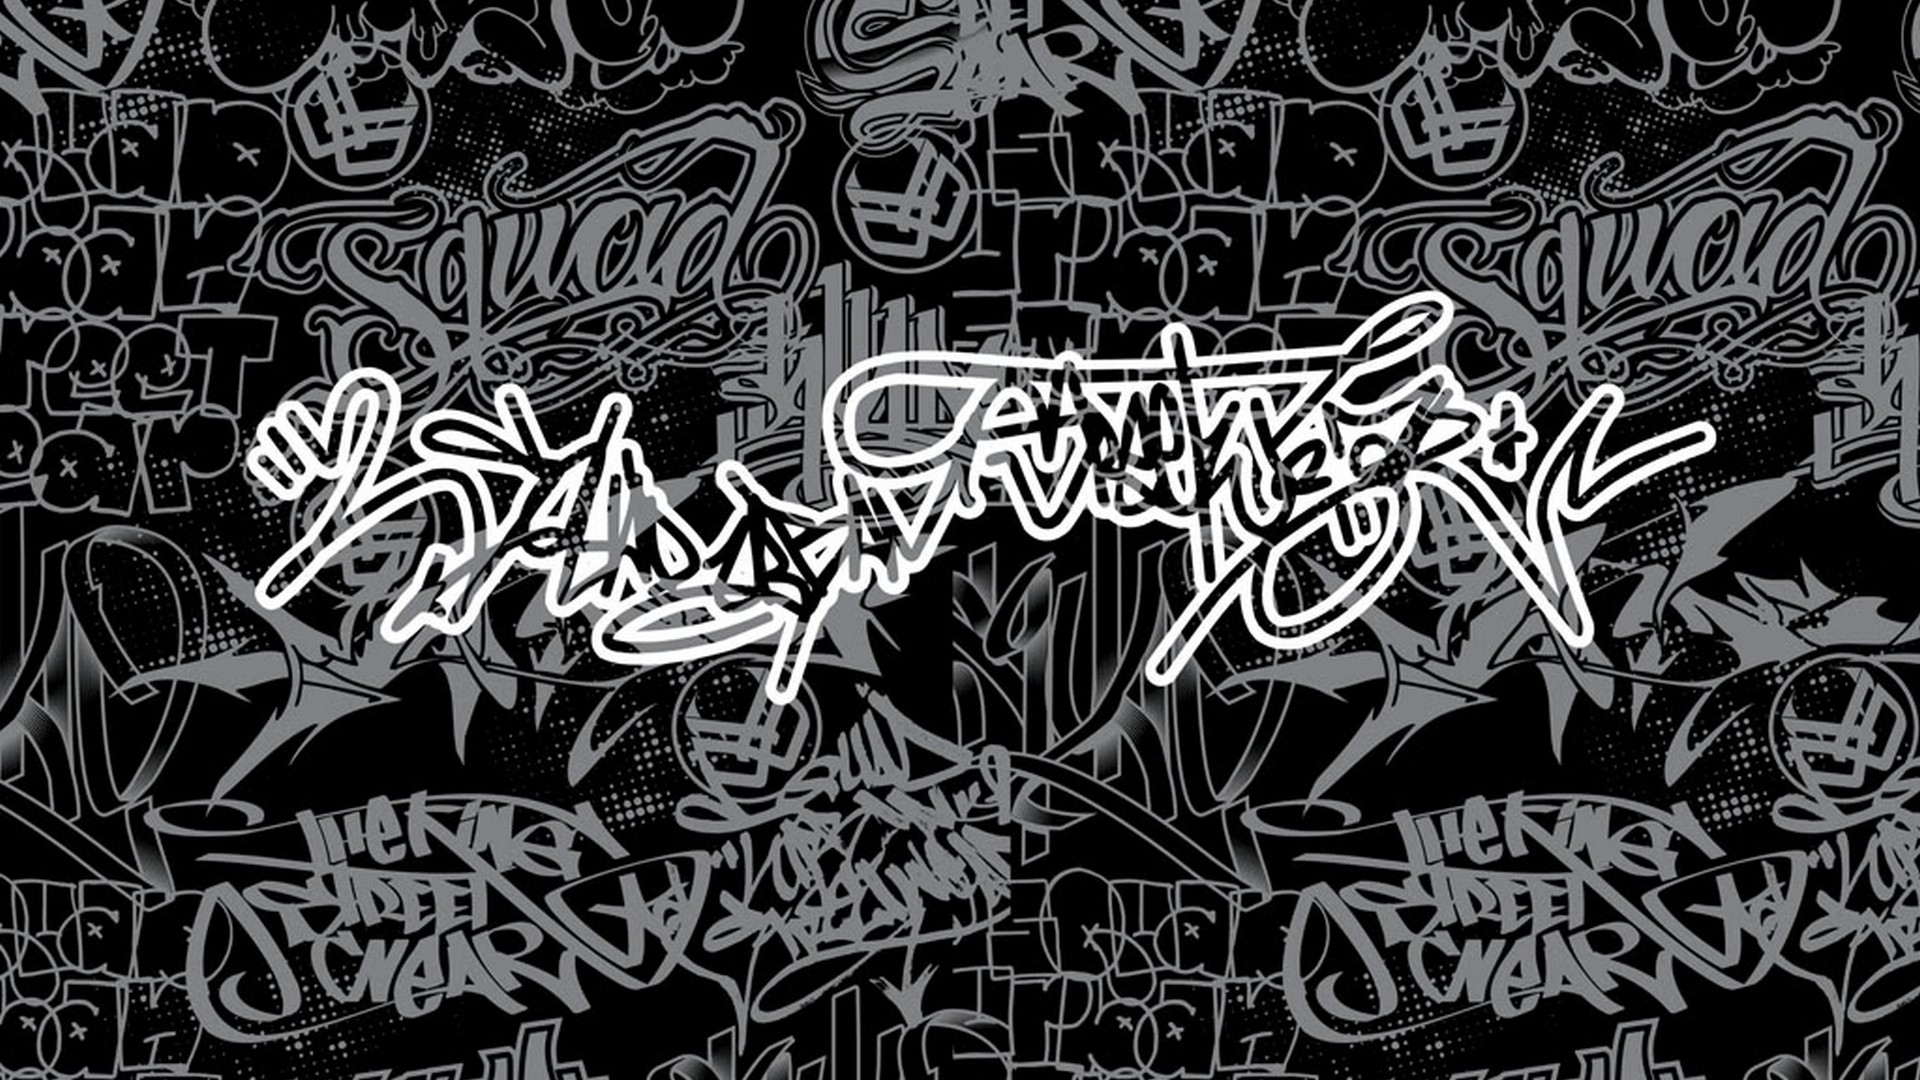 Graffiti Font Desktop Backgrounds with image resolution 1920x1080 pixel. You can make this wallpaper for your Desktop Computer Backgrounds, Mac Wallpapers, Android Lock screen or iPhone Screensavers